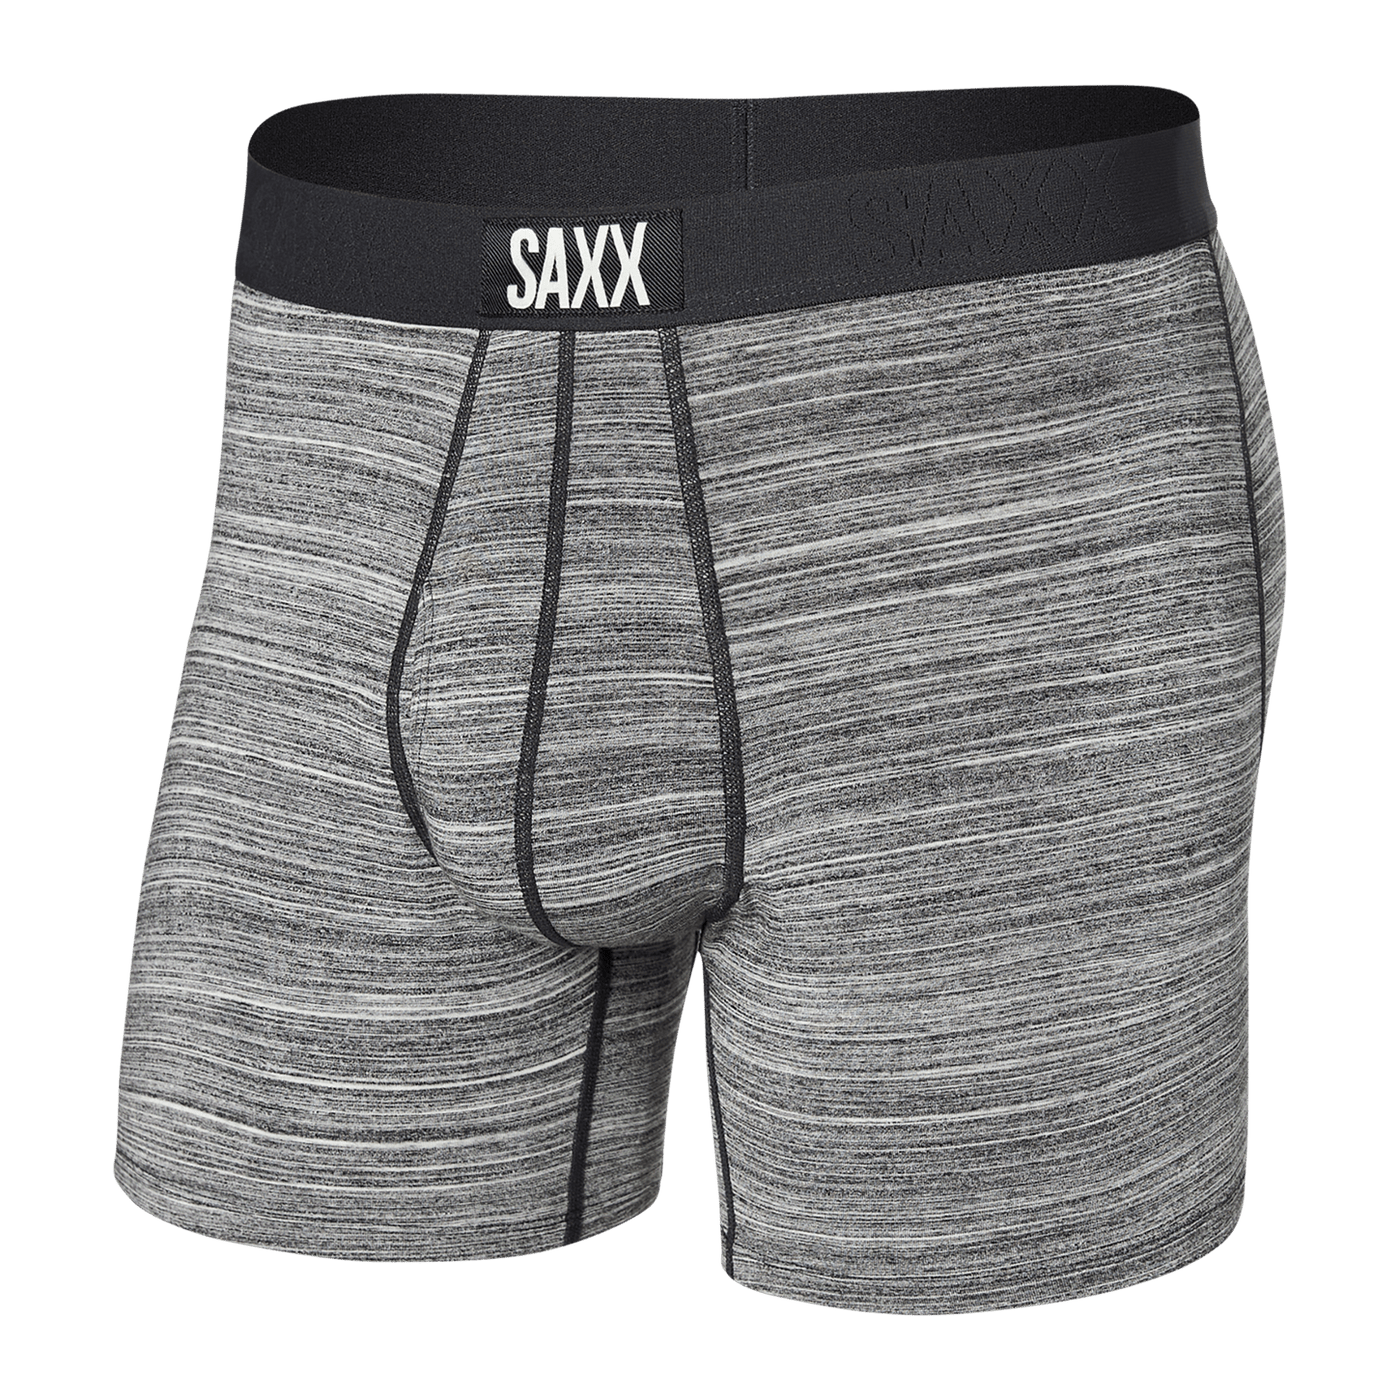 Saxx Ultra Boxers - Holiday Sweater